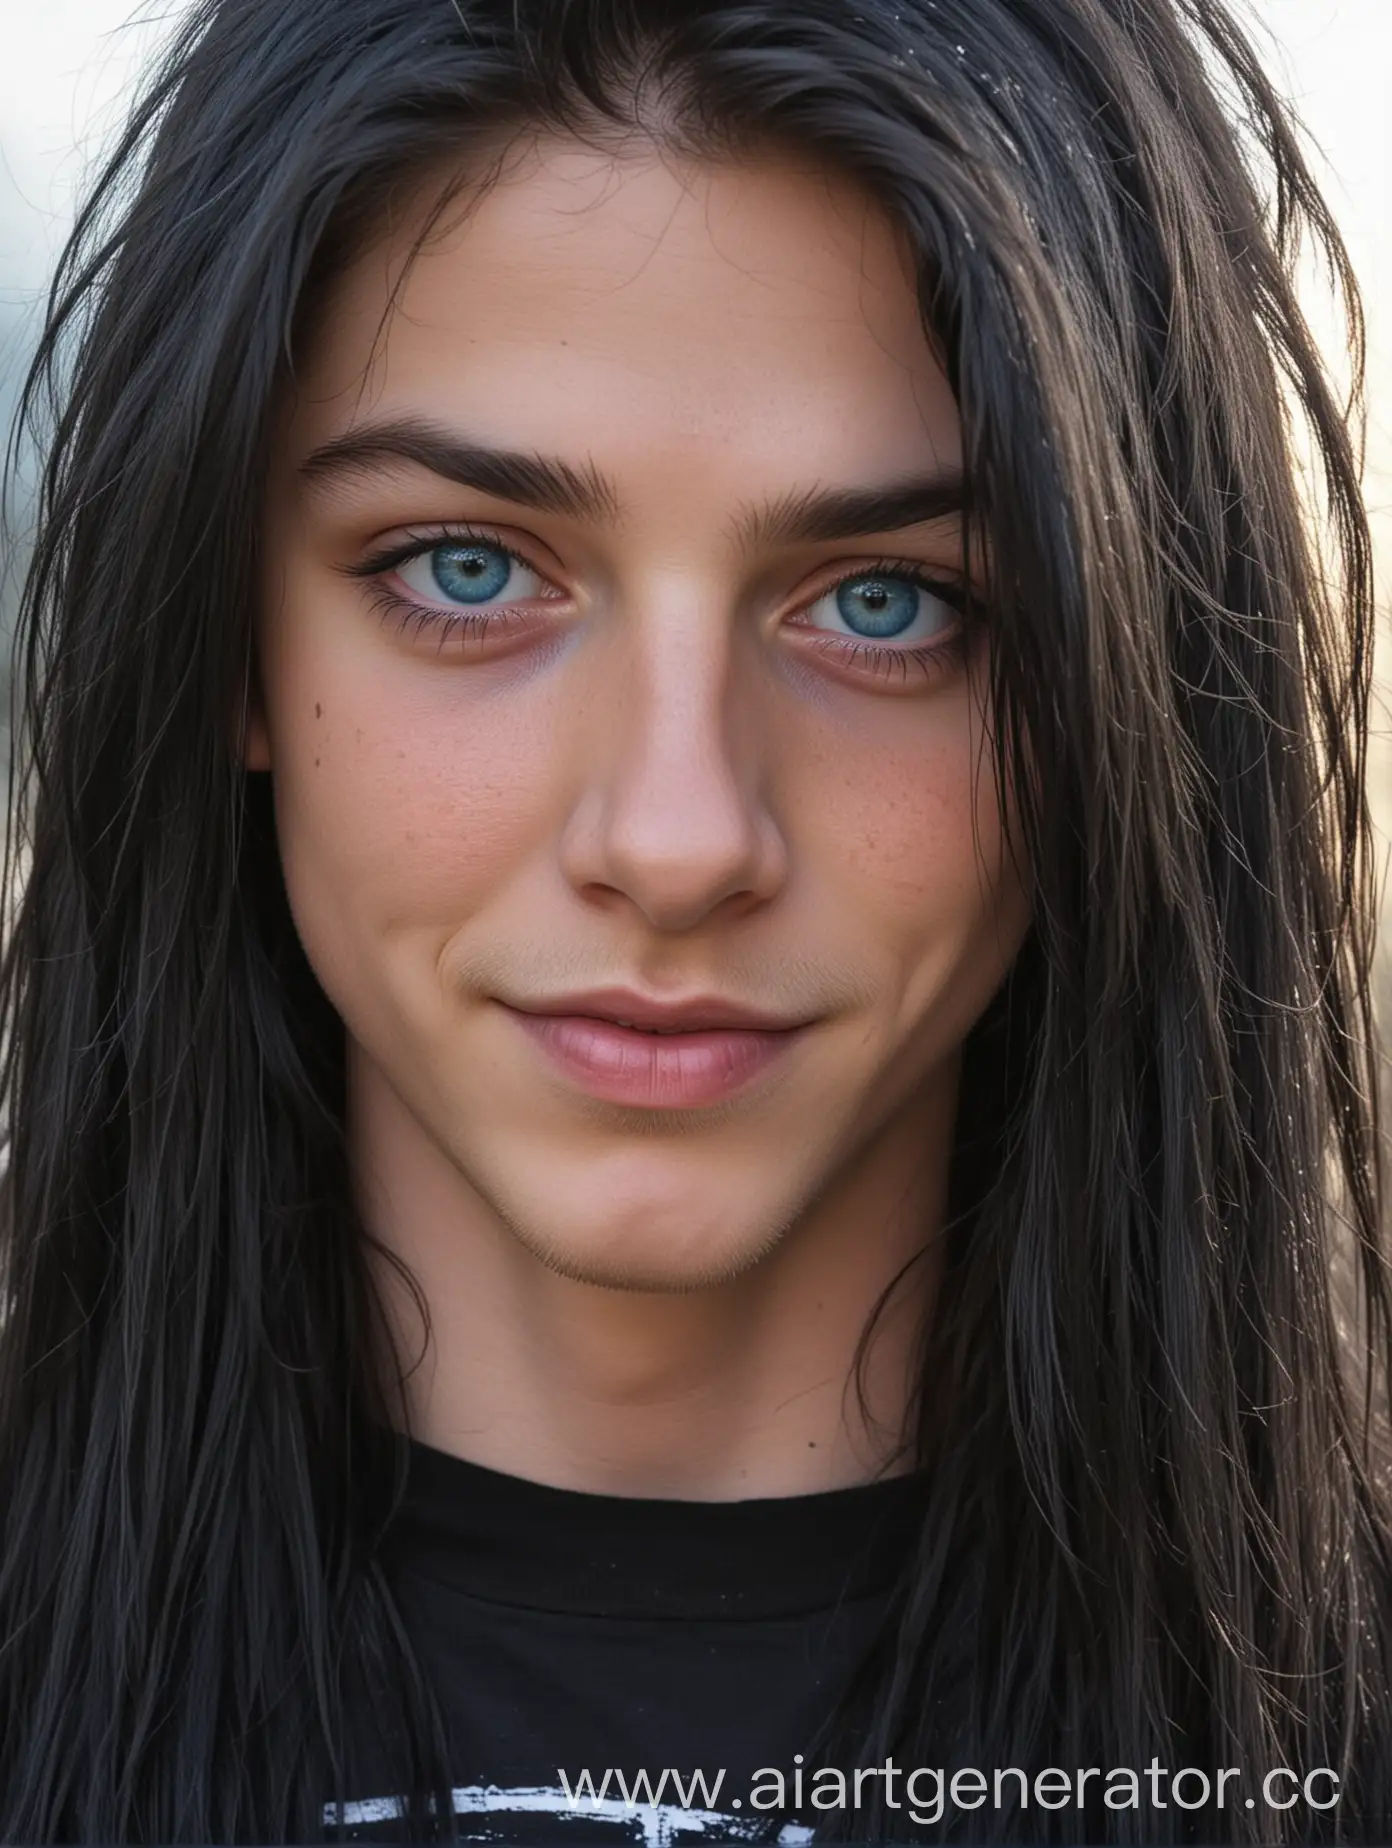 The guy is 15 years old, soft facial features, big blue eyes, long black hair, beautiful pretty appearance, metalhead, bruises under the eyes, smile